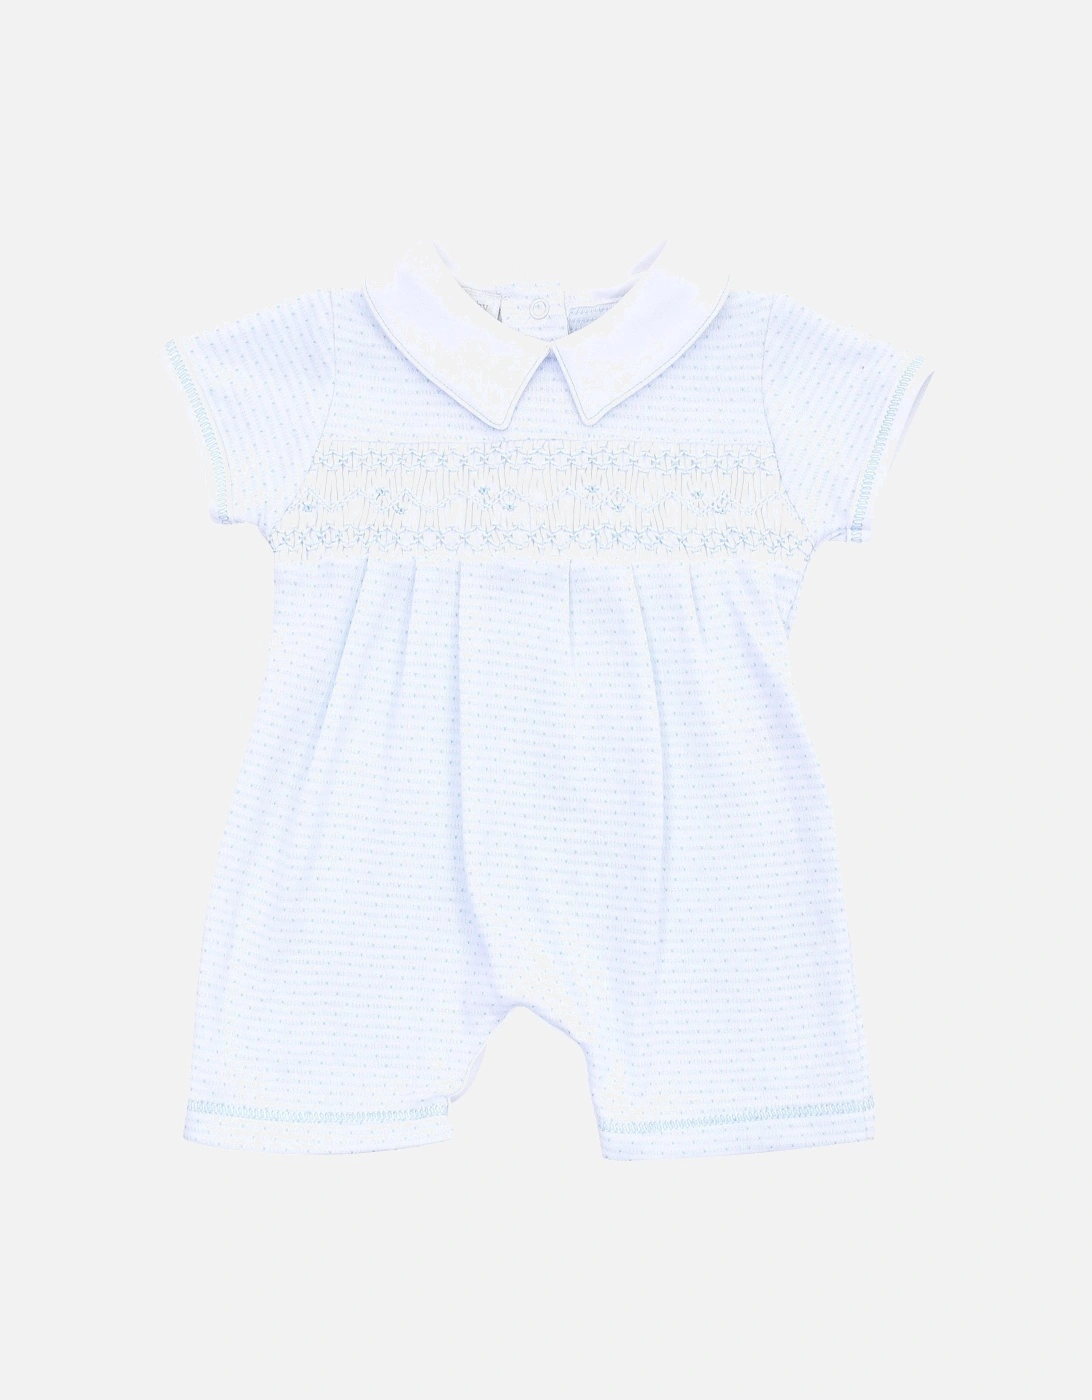 Maddy and Michael's Classics Smocked Collared Shortie, 2 of 1